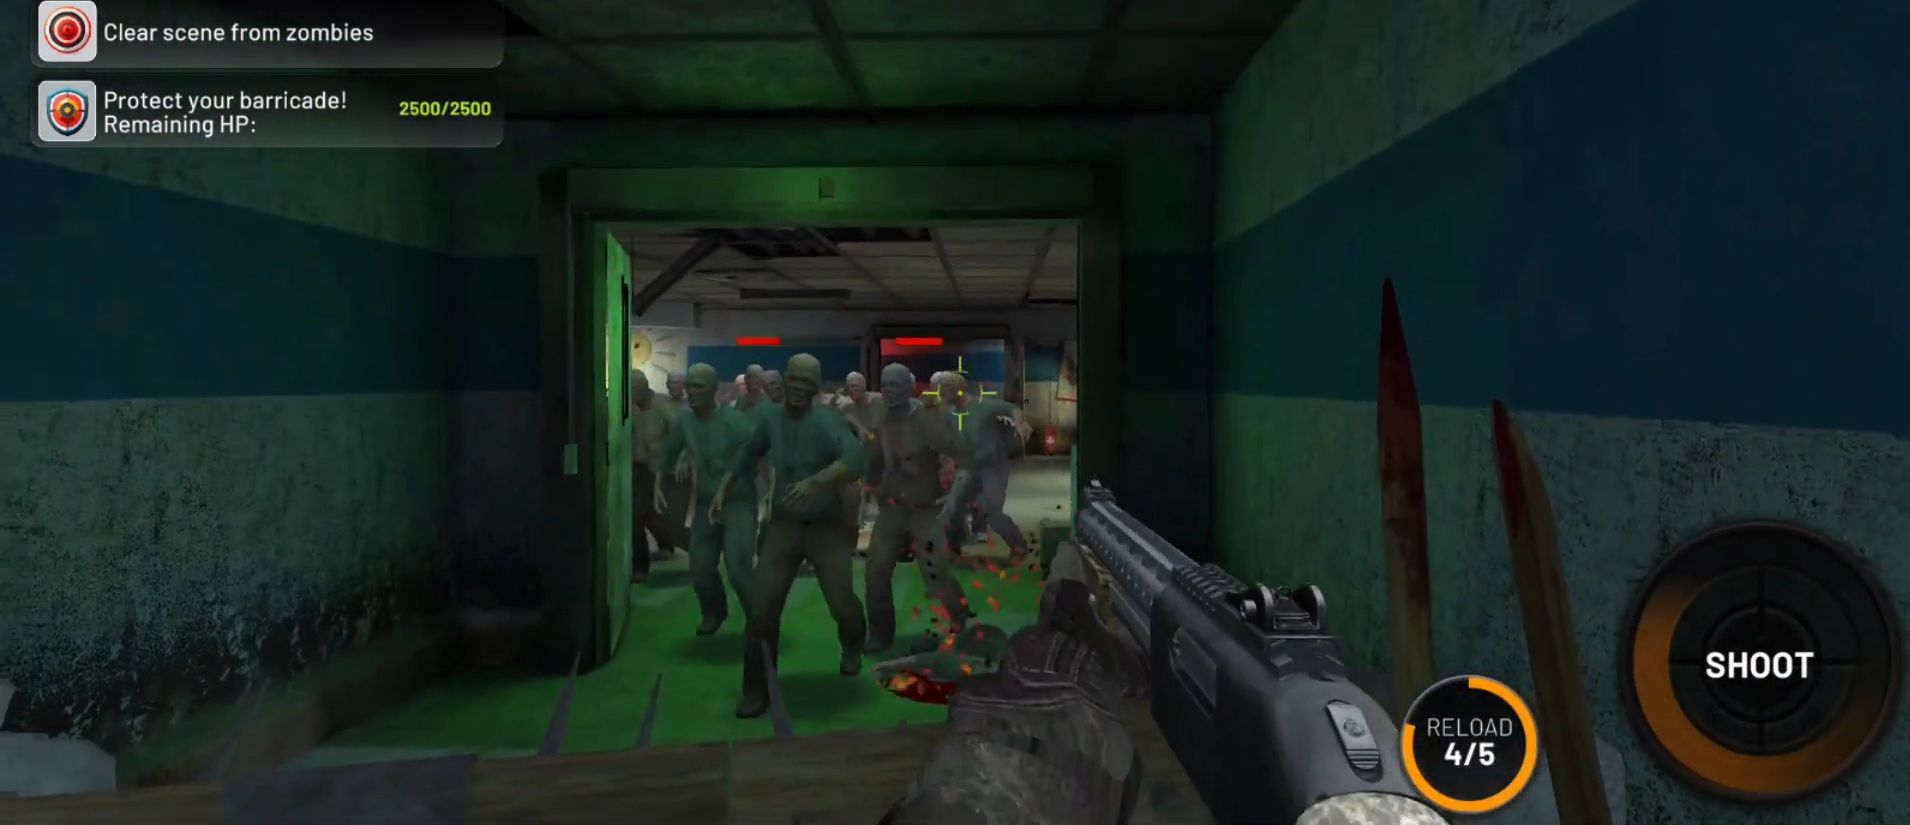 Deadlander FPS Zombie Game Download APK for Android (Free) mob